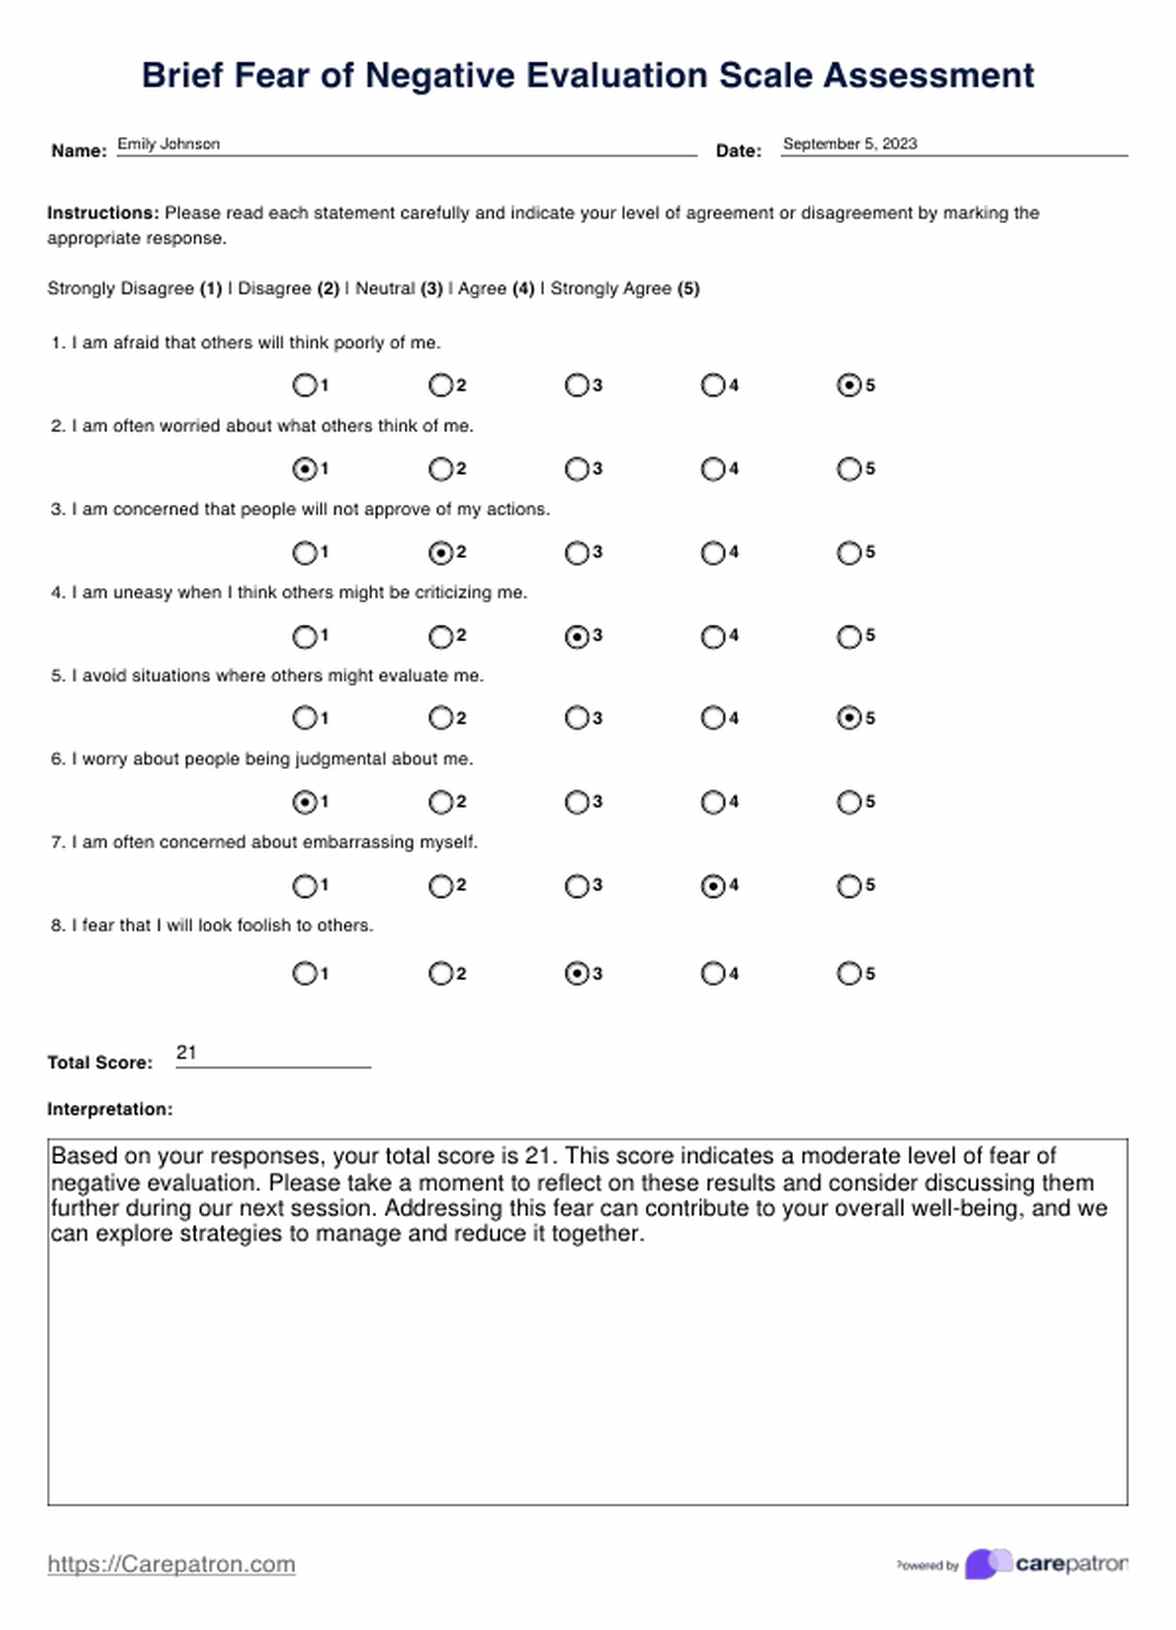 Brief Fear of Negative Evaluation Scale PDF Example